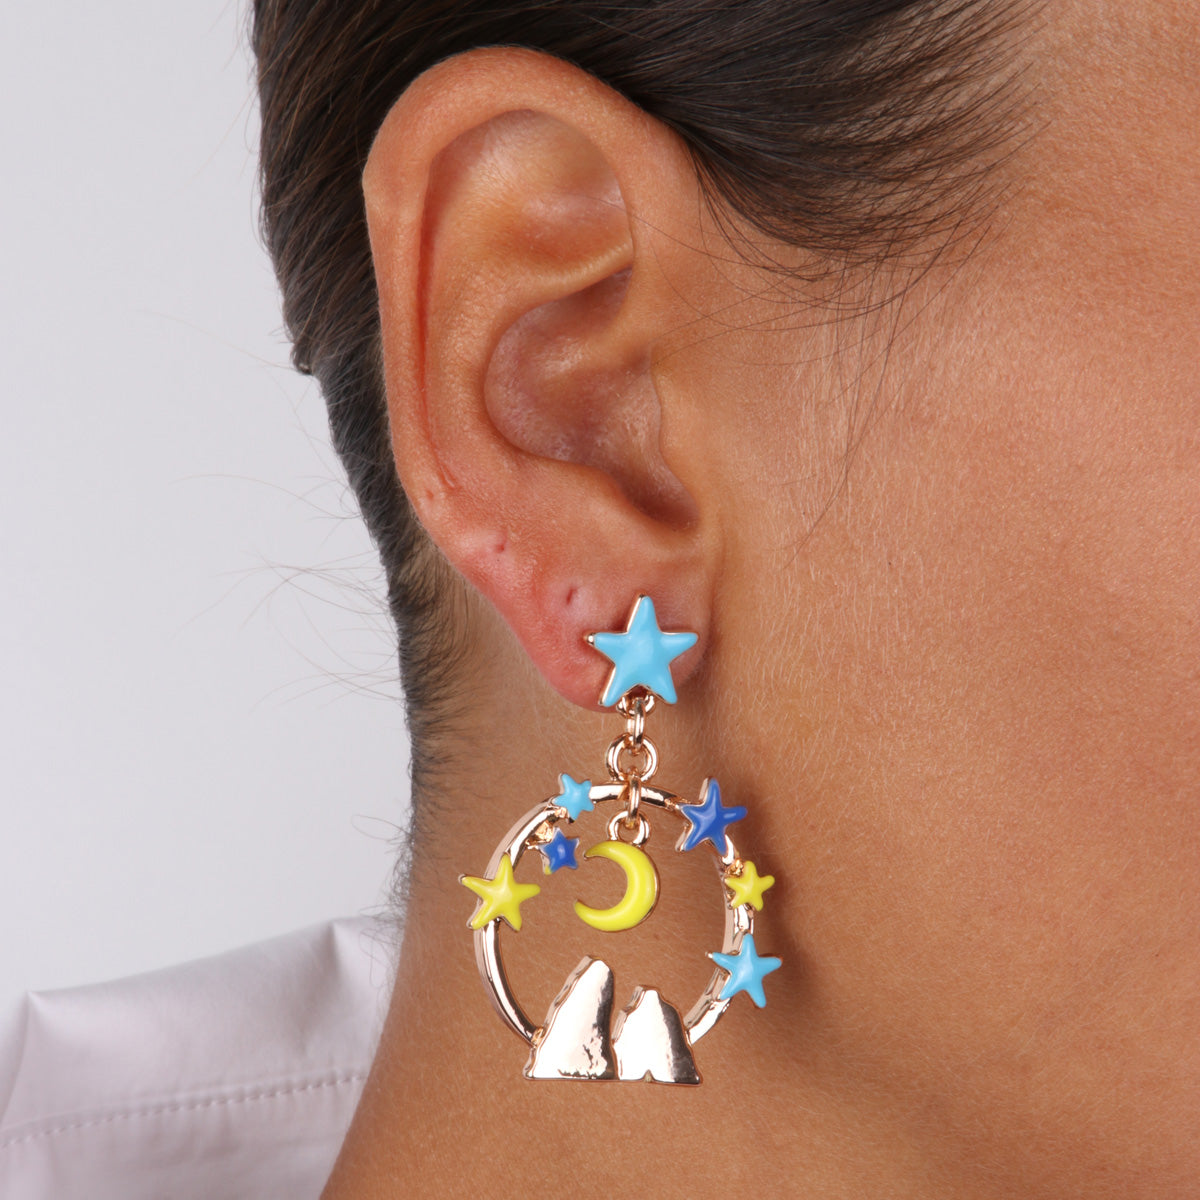 Metal earrings with star and rim pendants with starry sky and pharaglons embellished with colored glazes